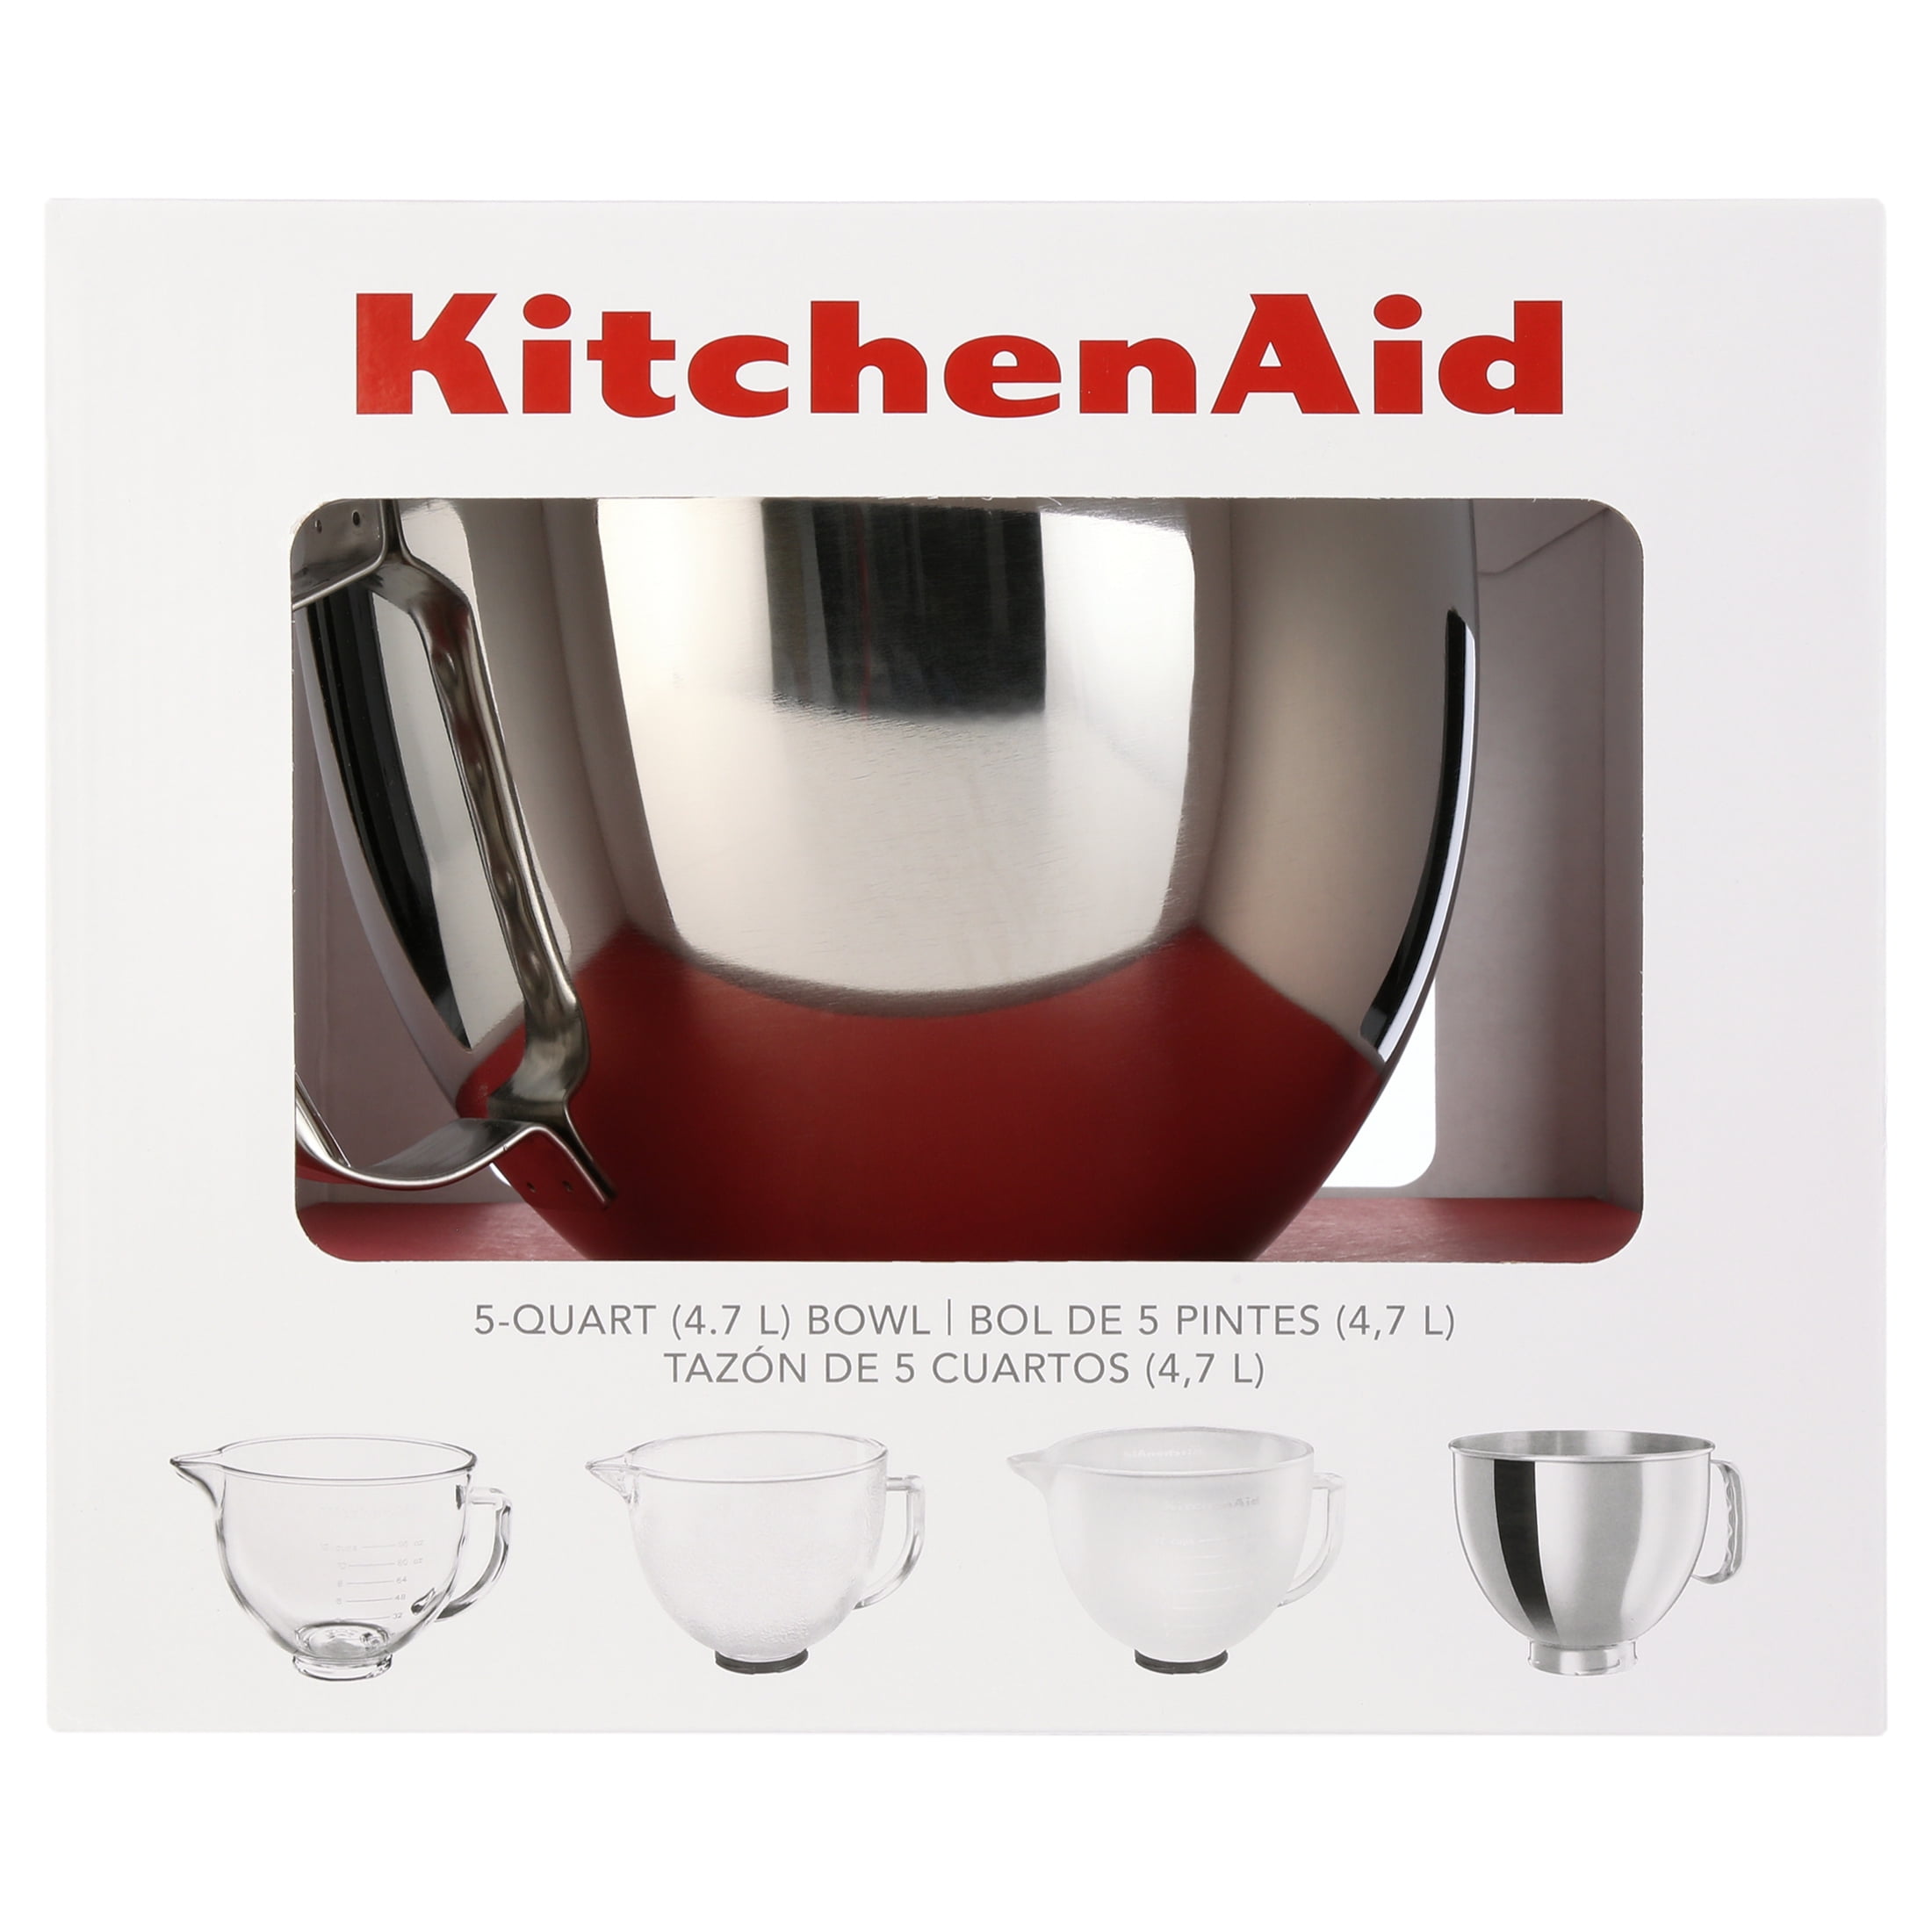 KitchenAid 5 Quart Bowl-Lift Polished Stainless Steel Bowl with Flat Handle  - K5ASBP, Silver